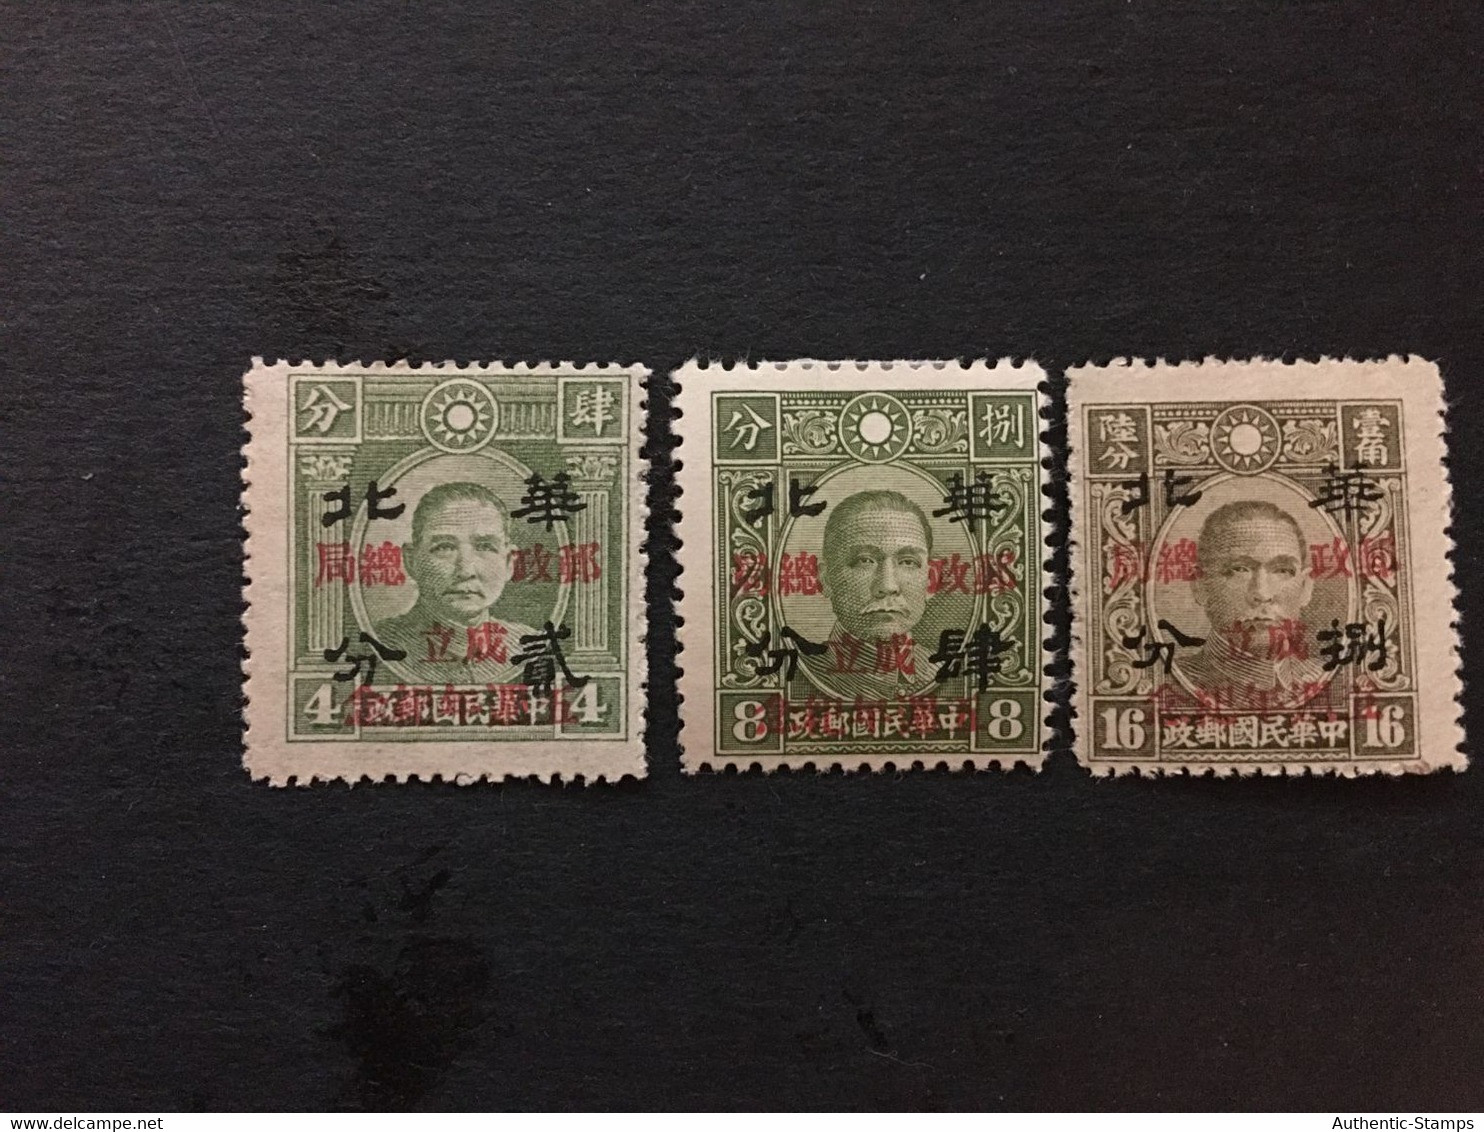 1943 CHINA  STAMP Set,5th Anniversary Of D.G Of Posts, Rare Overprint, Japanese Occupation, MLH, CINA, CHINE,  LIST 1067 - 1941-45 Cina Del Nord